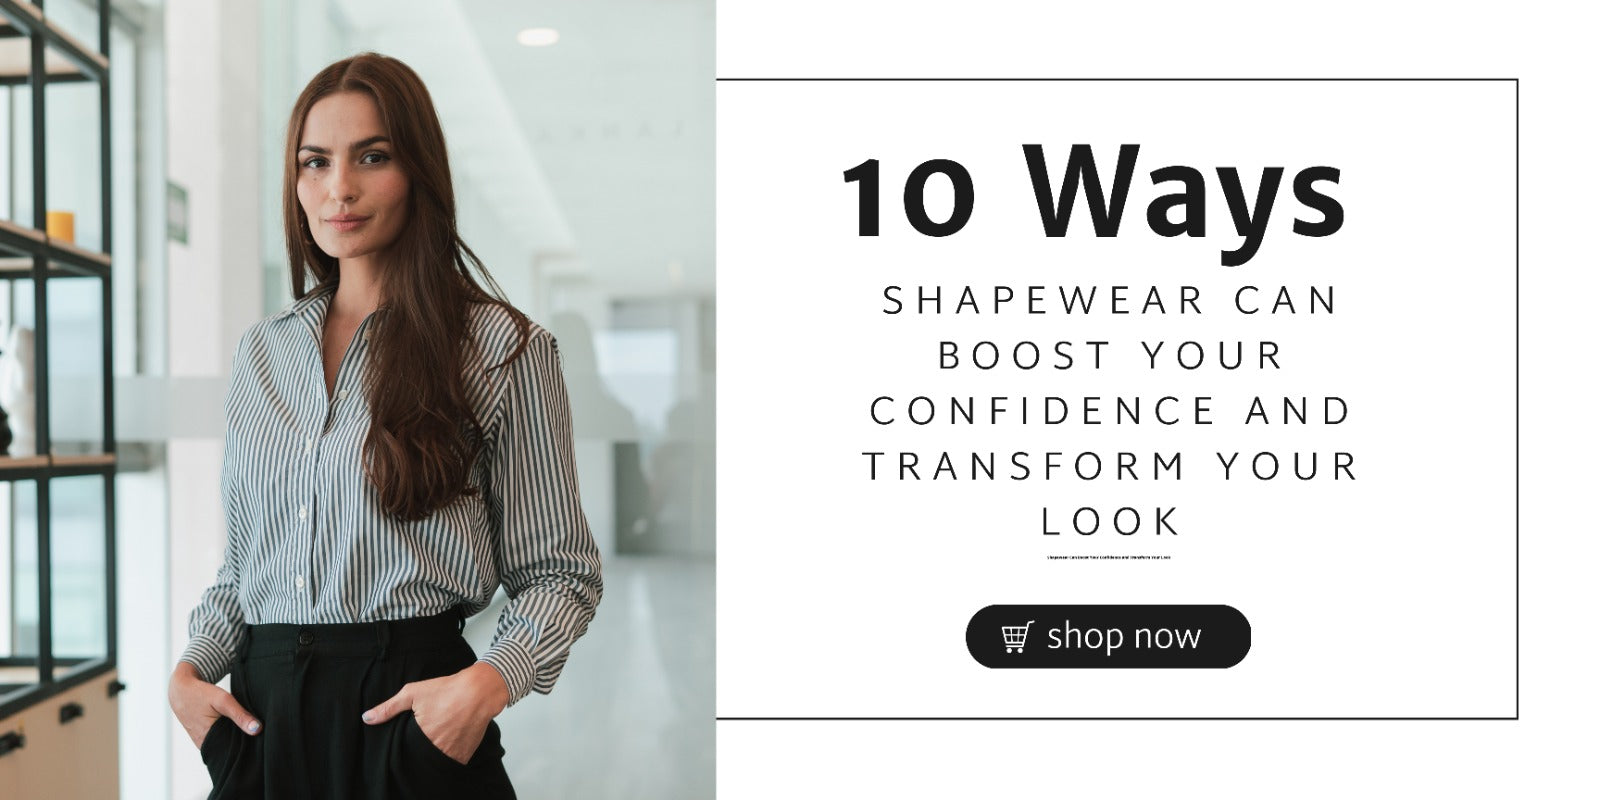 If you are looking at giving shapewear a try here are some tips